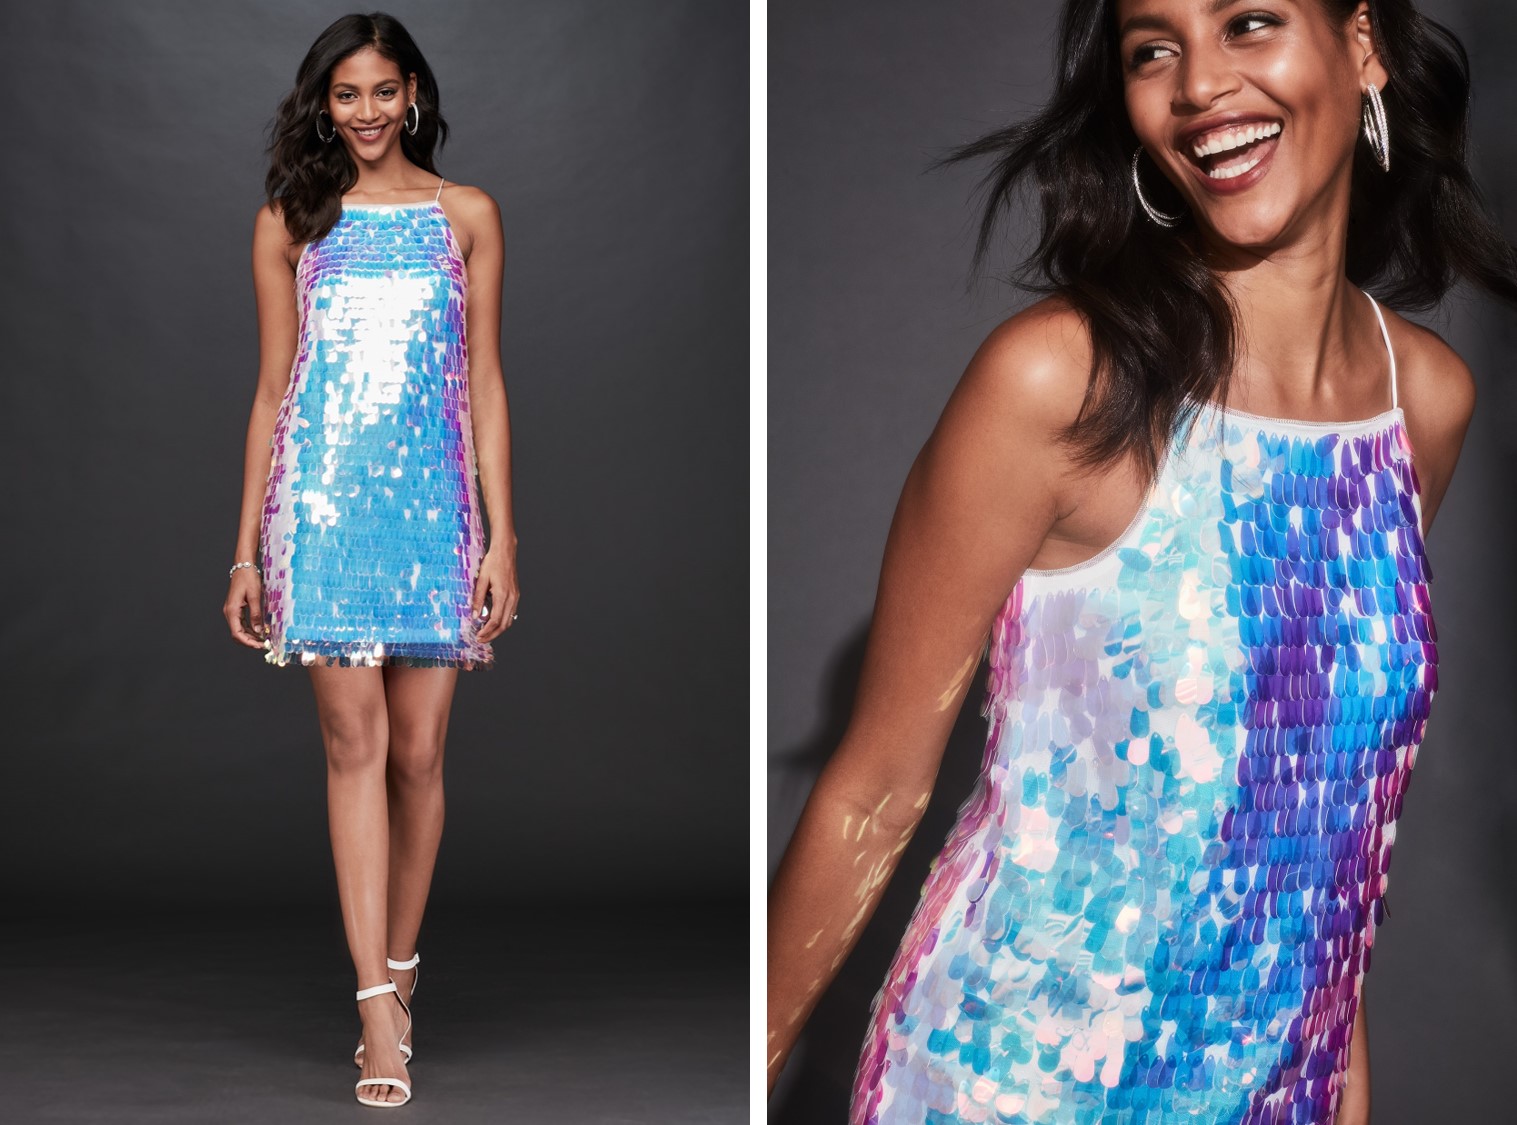 Bride in iridescent sequin mini dress | After-party dresses from David's Bridal 